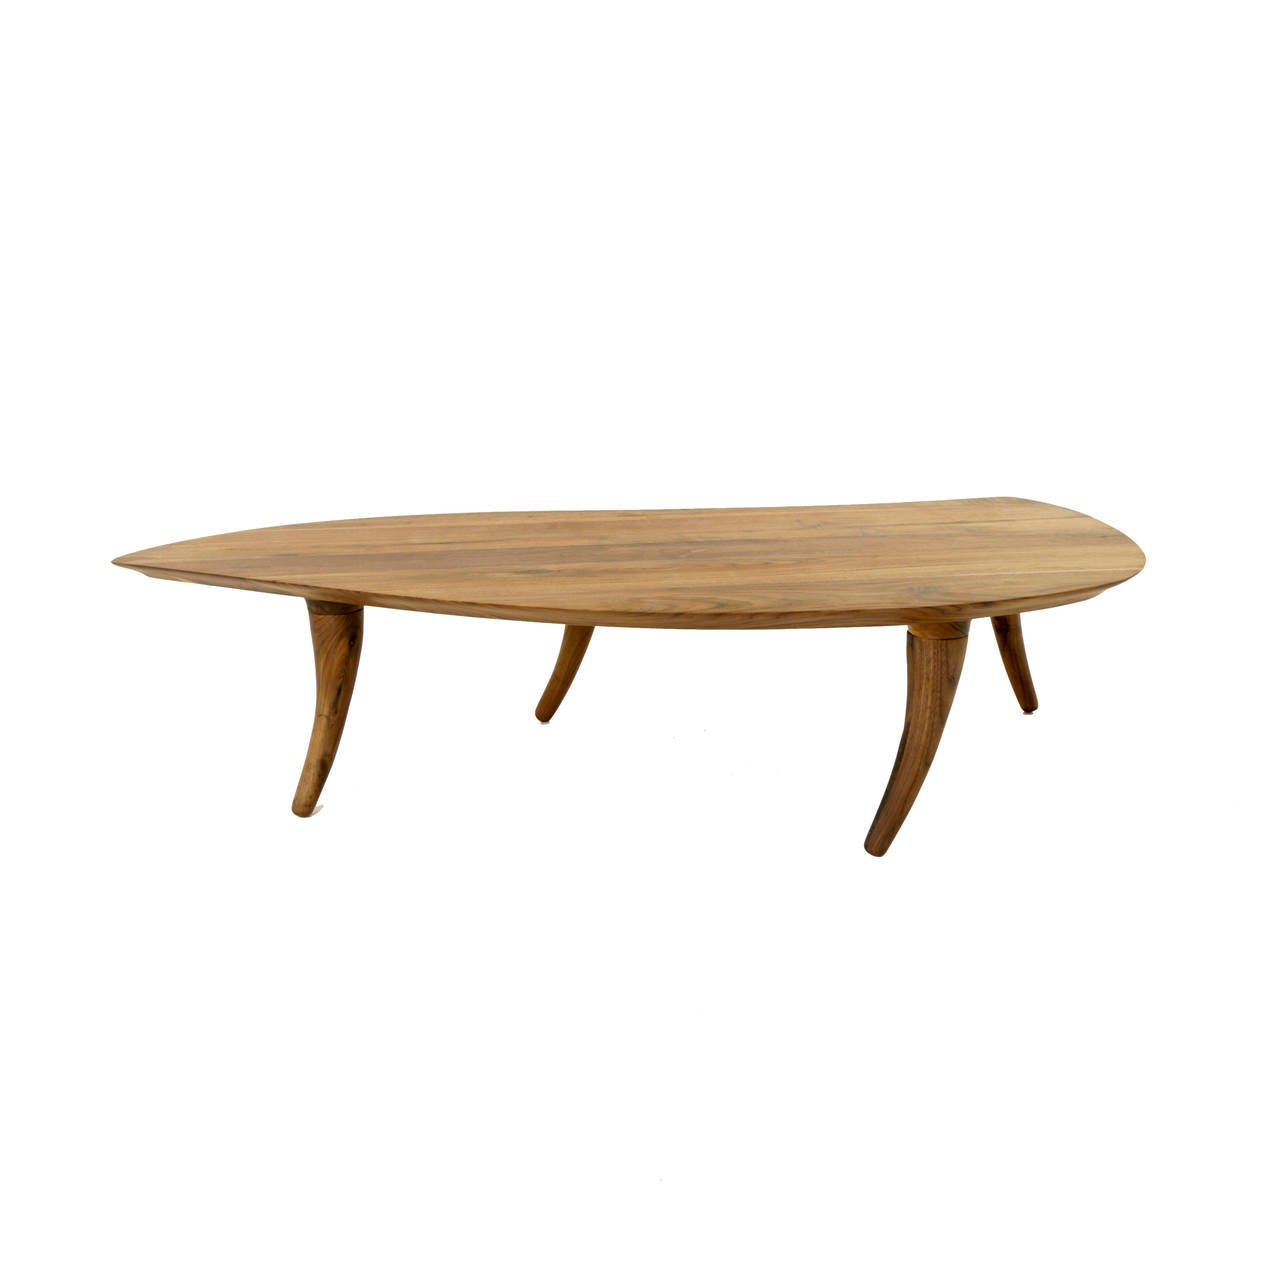 Oiled Sculptural Walnut Coffee Table with Curved Legs